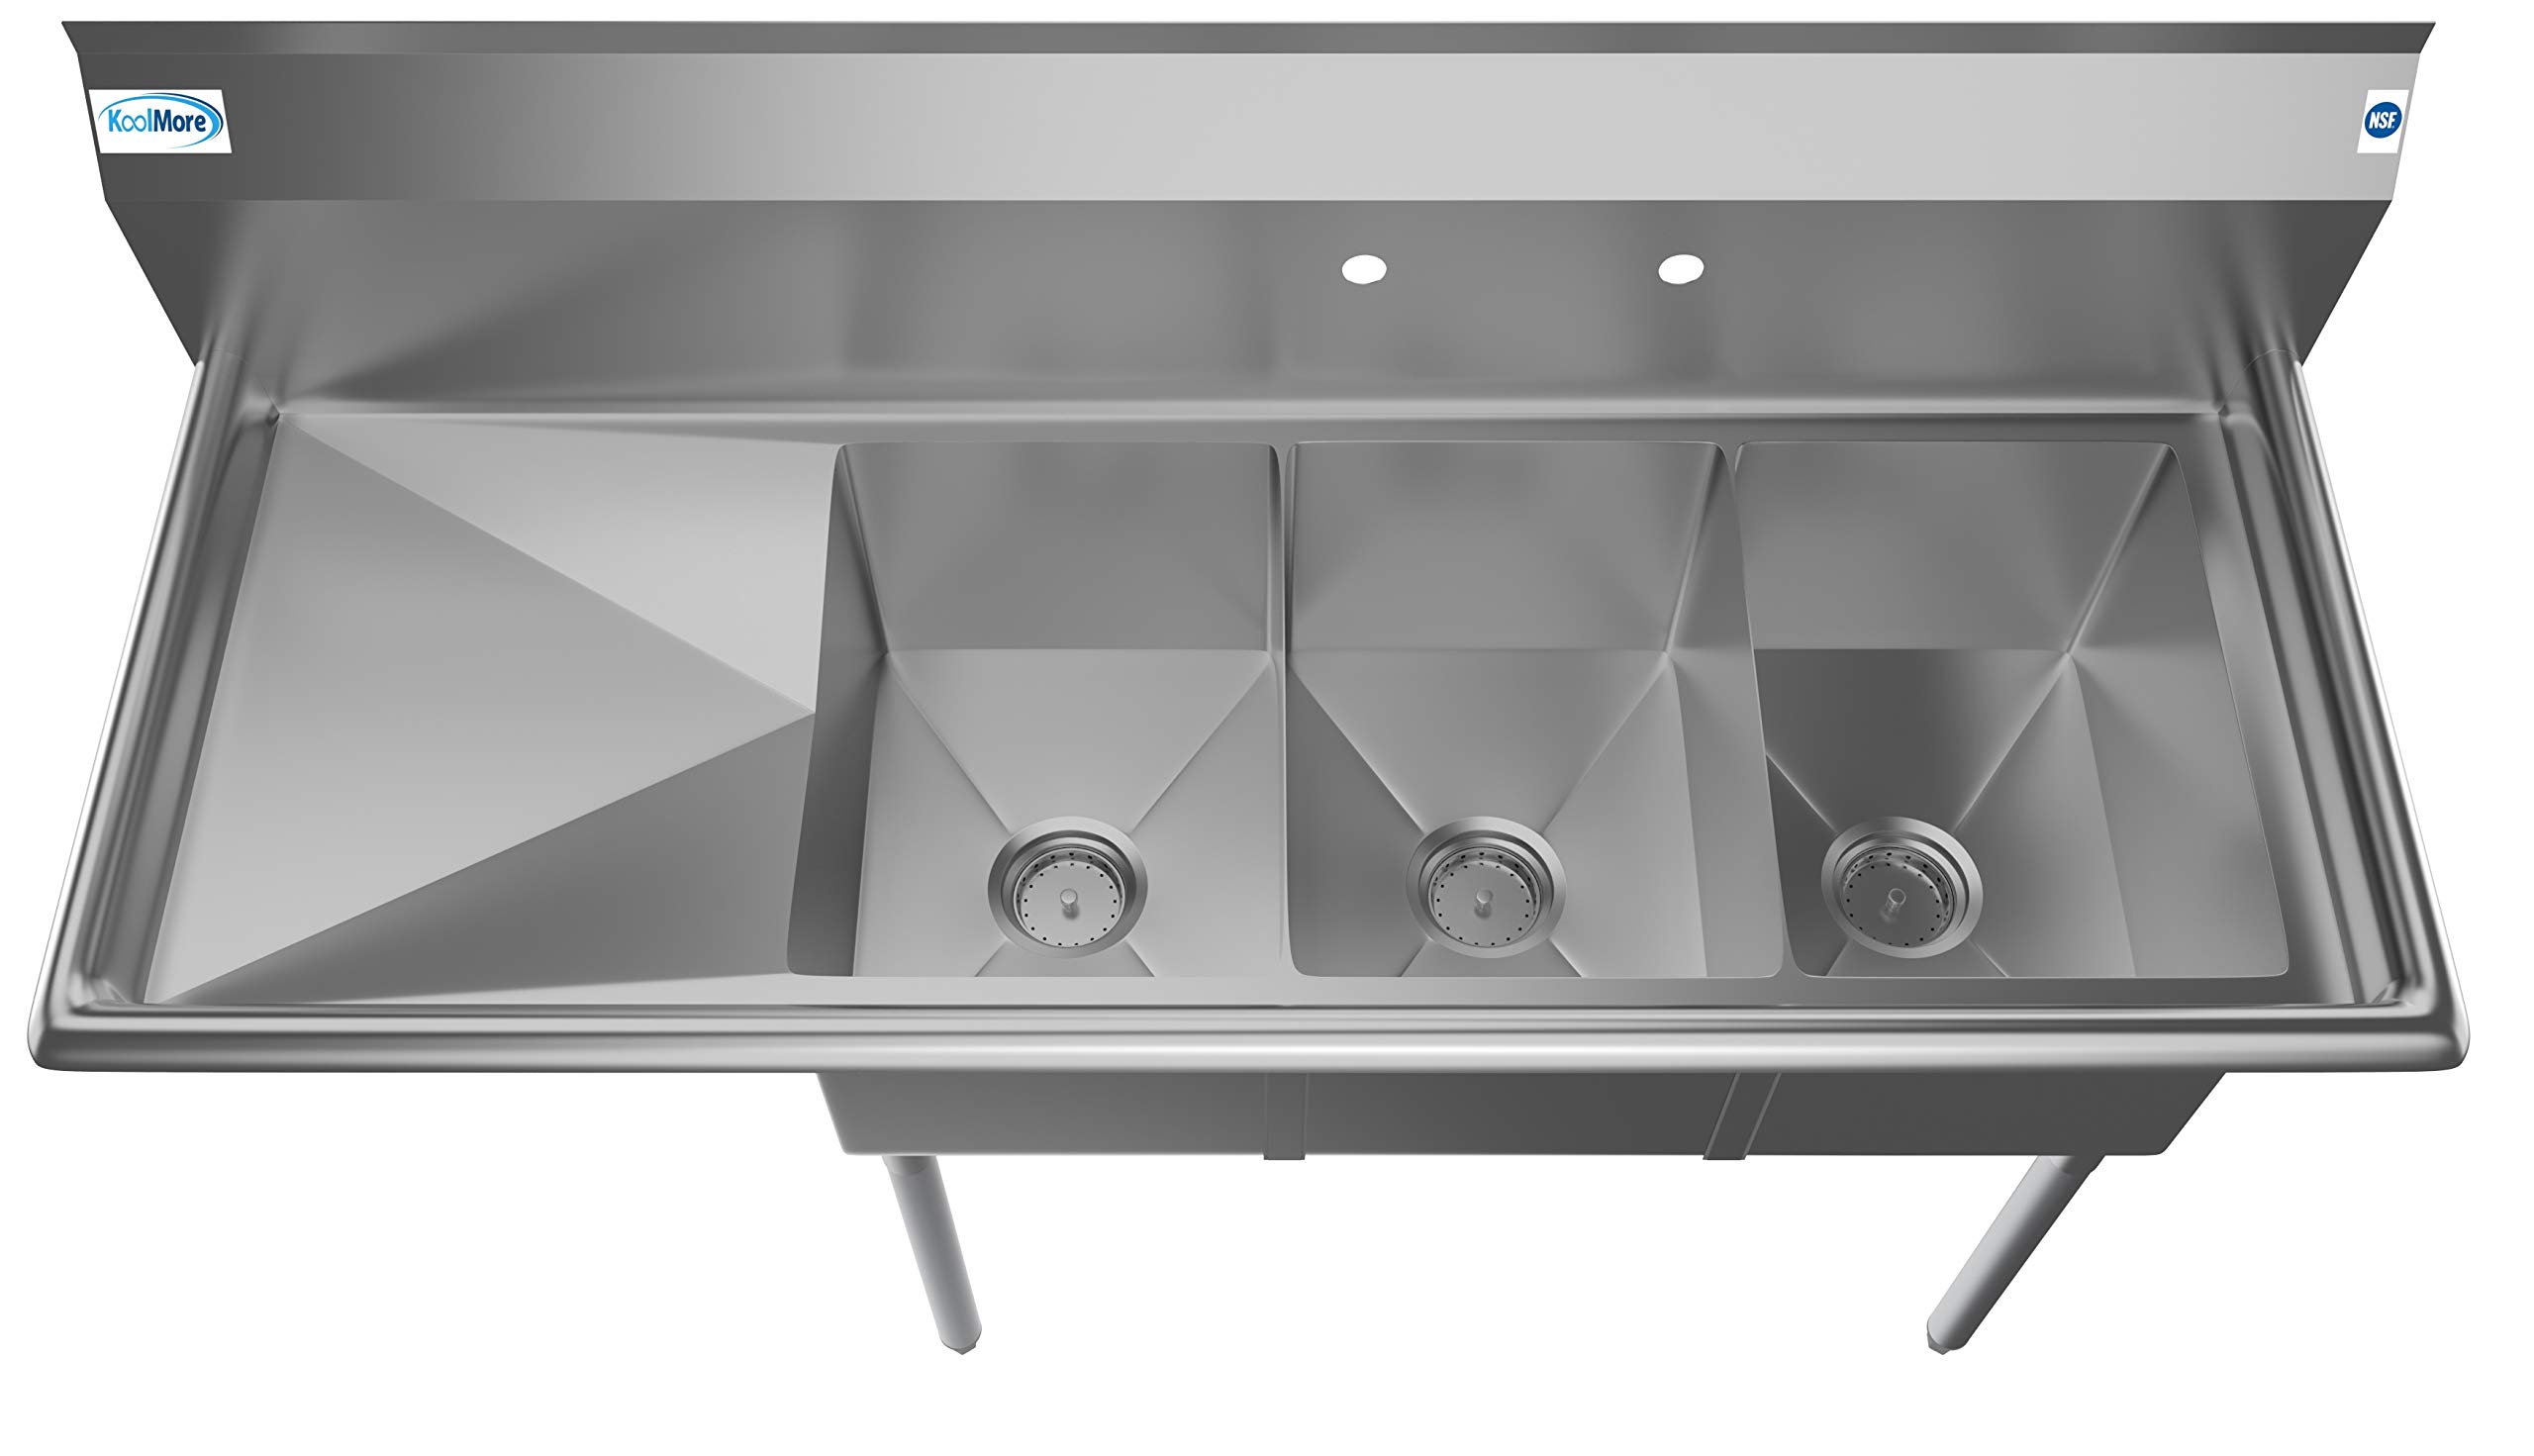 KoolMore 3 Compartment Stainless Steel Commercial Kitchen Sink with Large Drainboard - Bowl Size 12" x 16" x 10", Silver